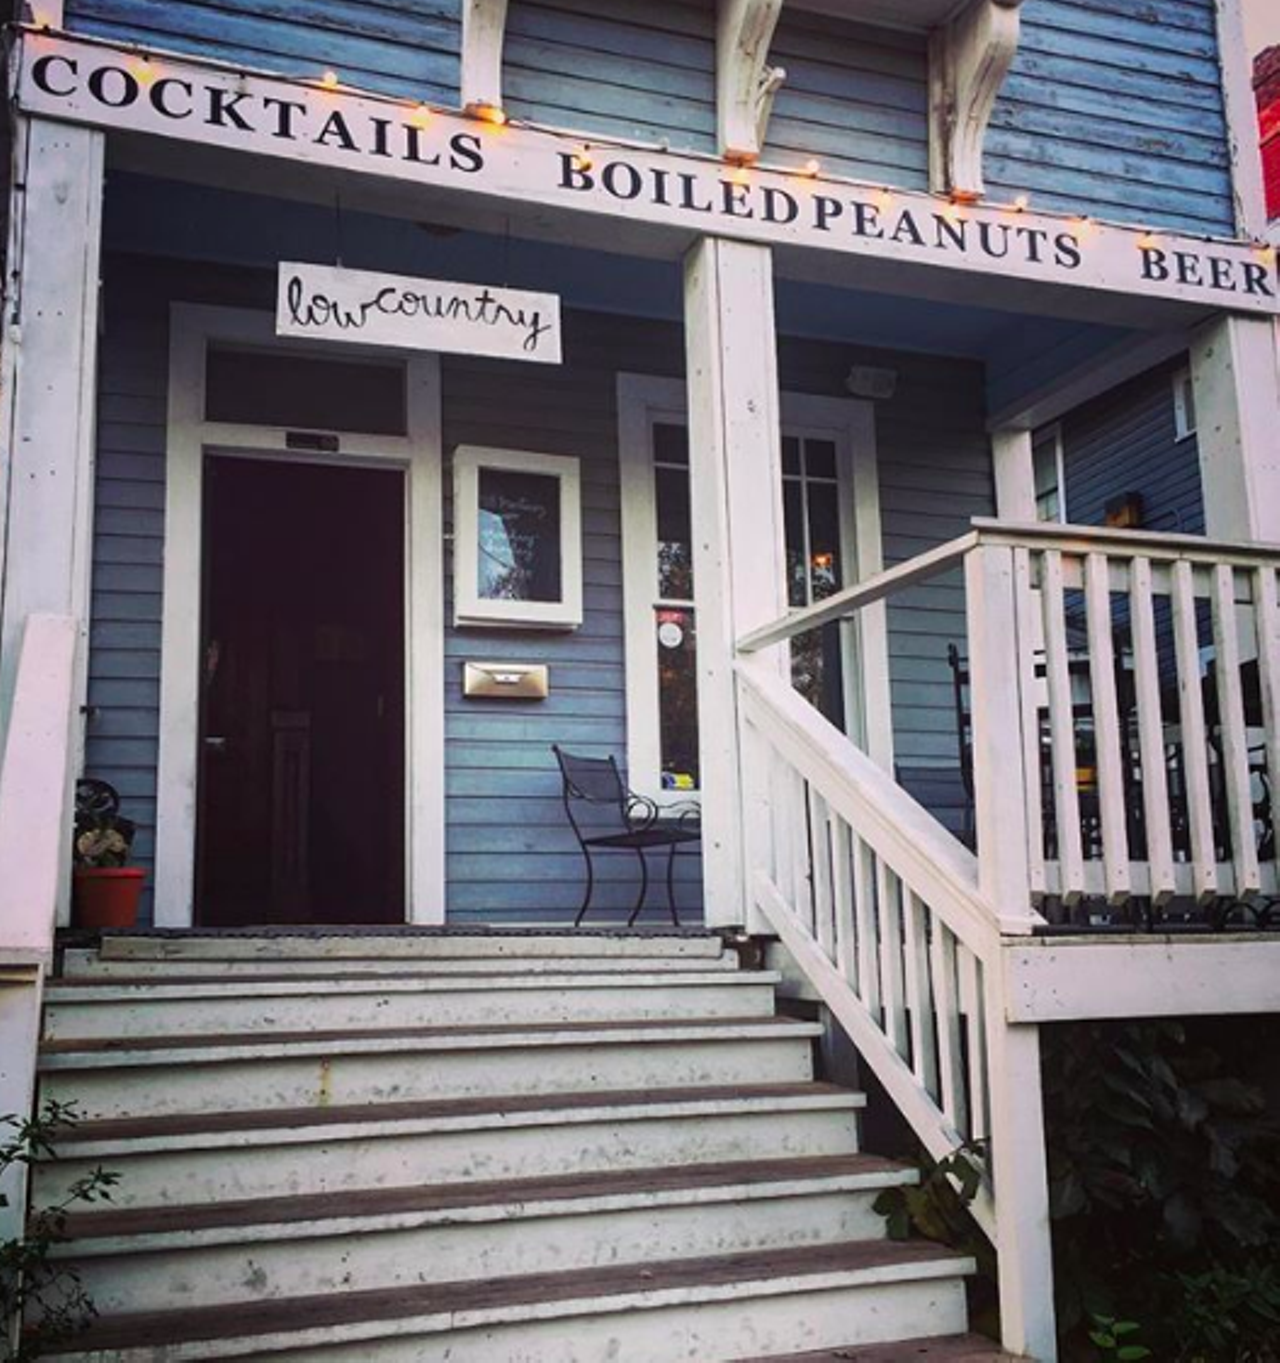 Lowcountry
318 Martinez St, (210) 560-2224, facebook.com/lowcountrysa
Solid drinks, a country theme and laid-back? Yup, Lowcountry has it all. Plus, it has live music to boot that will have you comin’ over on at least a weekly basis.
Photo via Instagram / do210